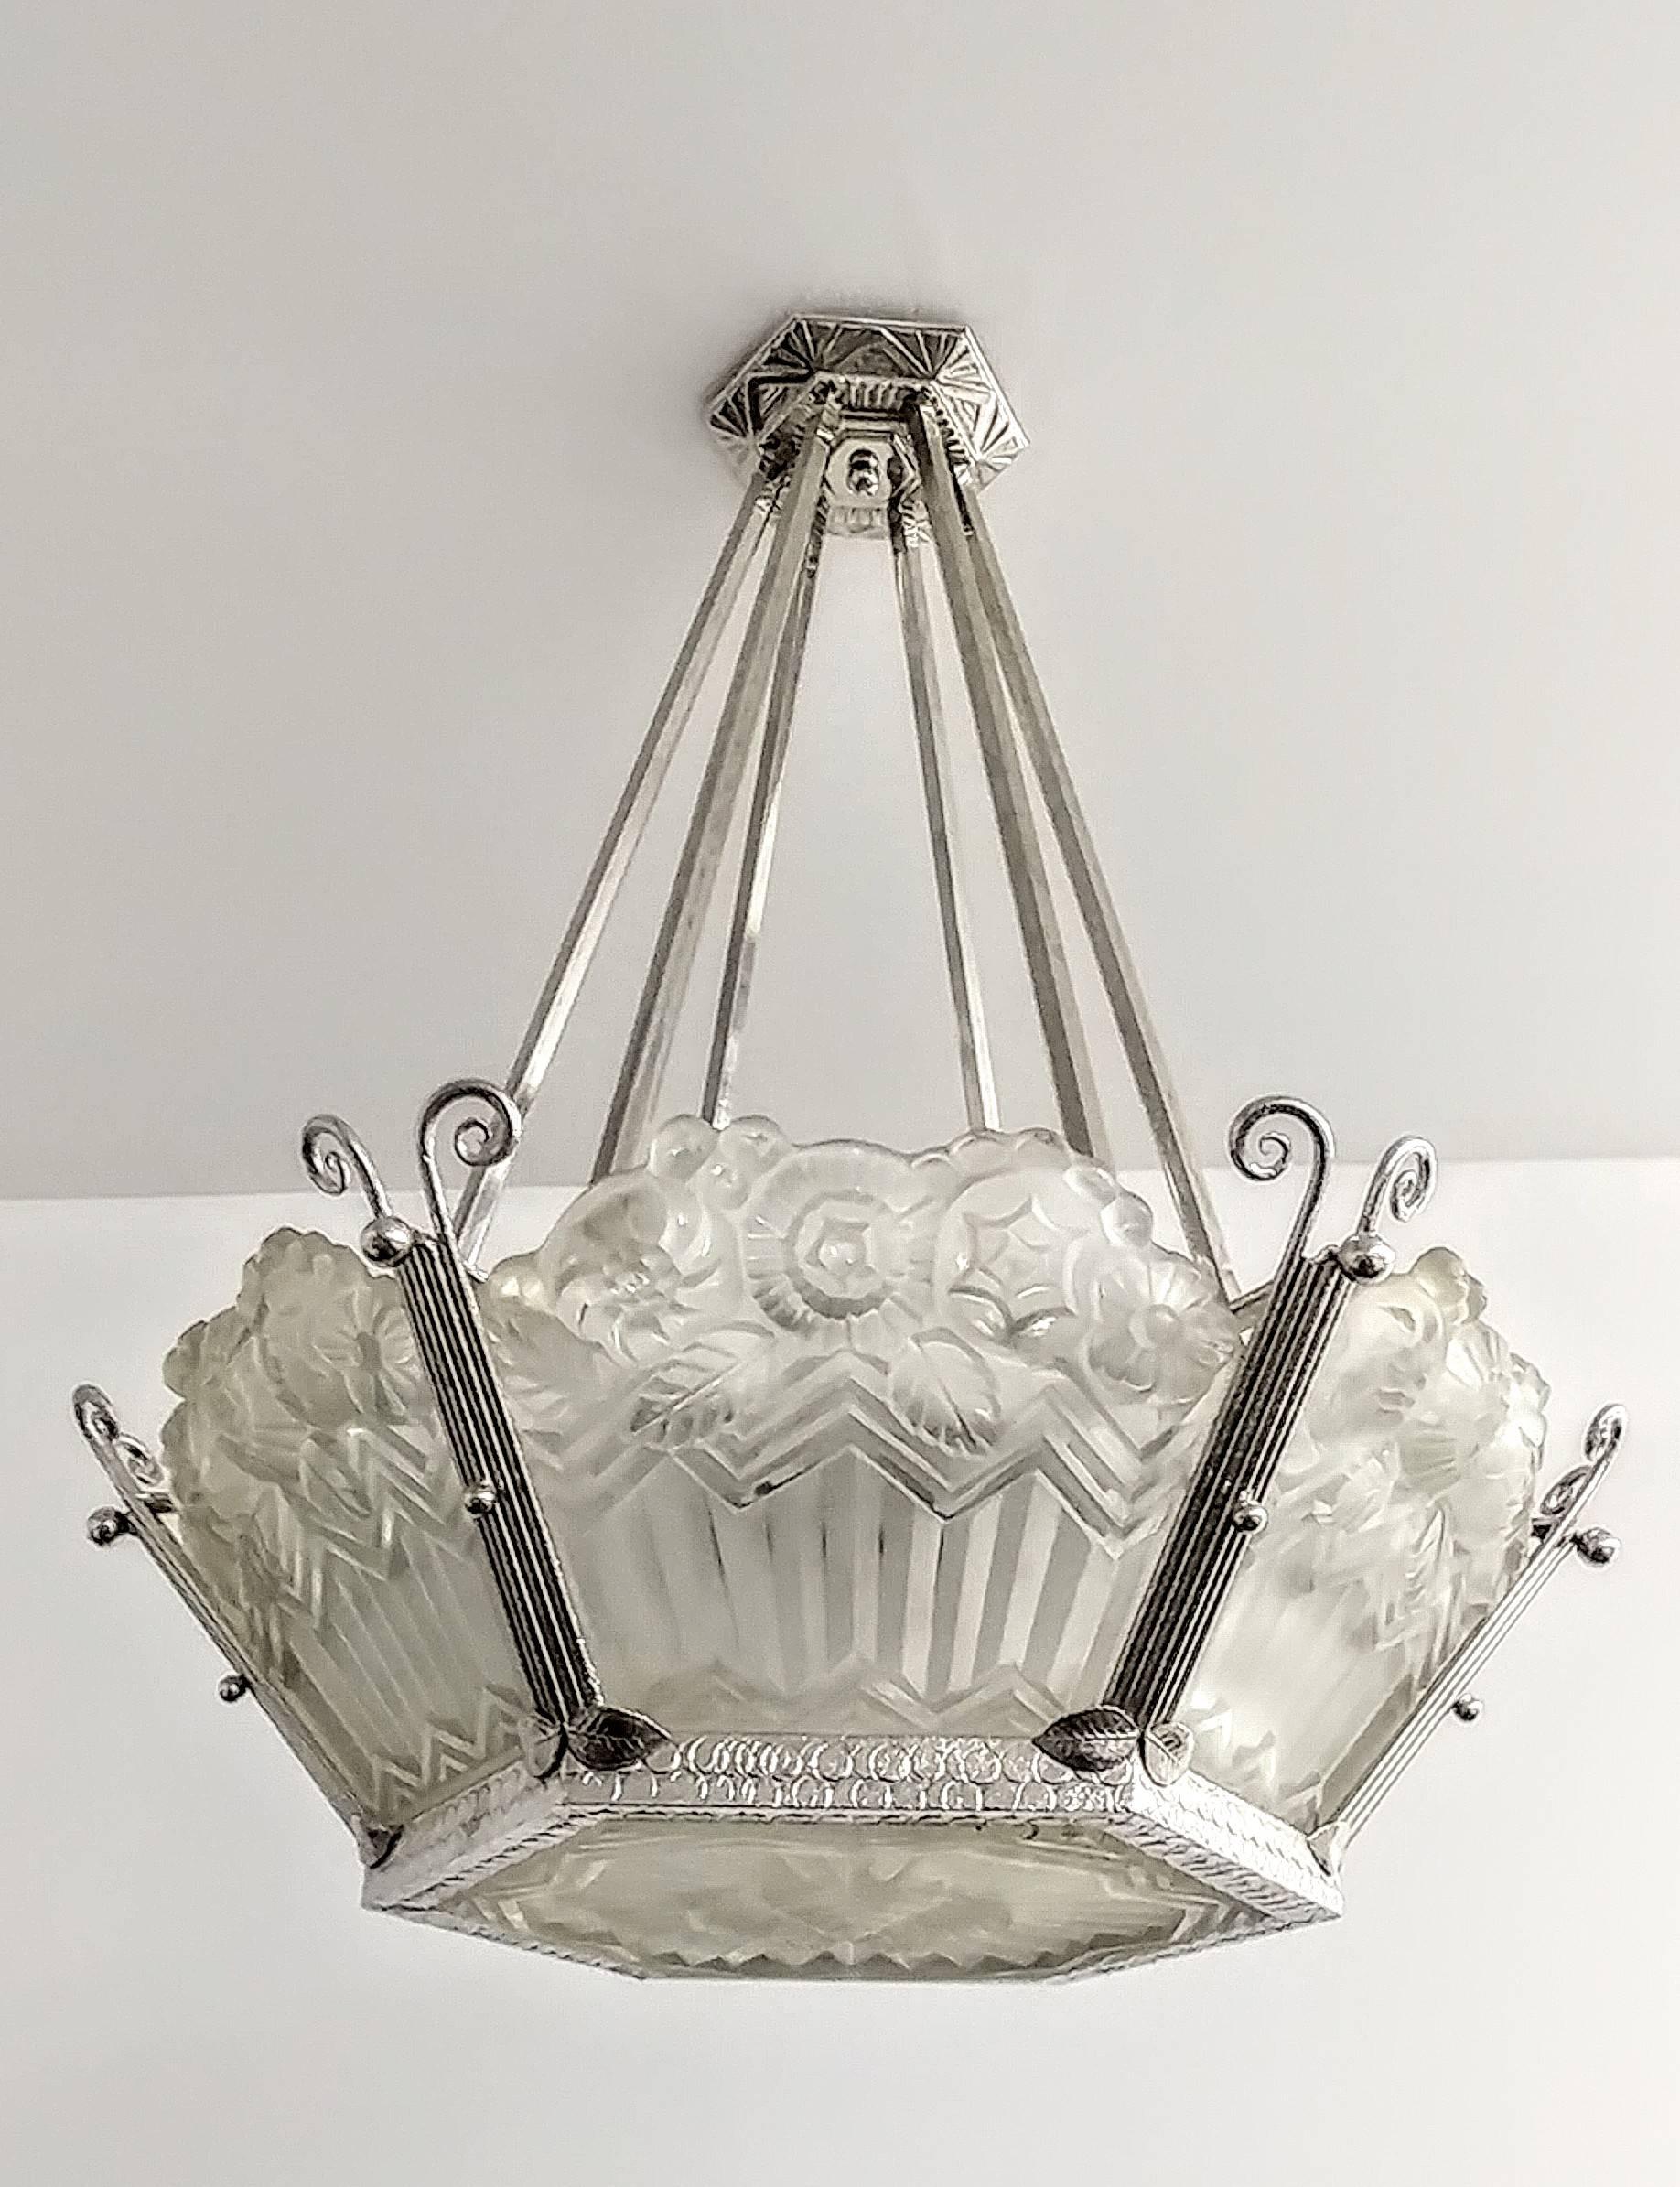 
A French Art Deco chandelier by the French Artist Jean Noverdy. Six shades with matching hexagonal center coupe in clear frosted glass with intricate flowers with geometric motif details. Shades are marked NOVERDY FRANCE. Supported by a nickeled